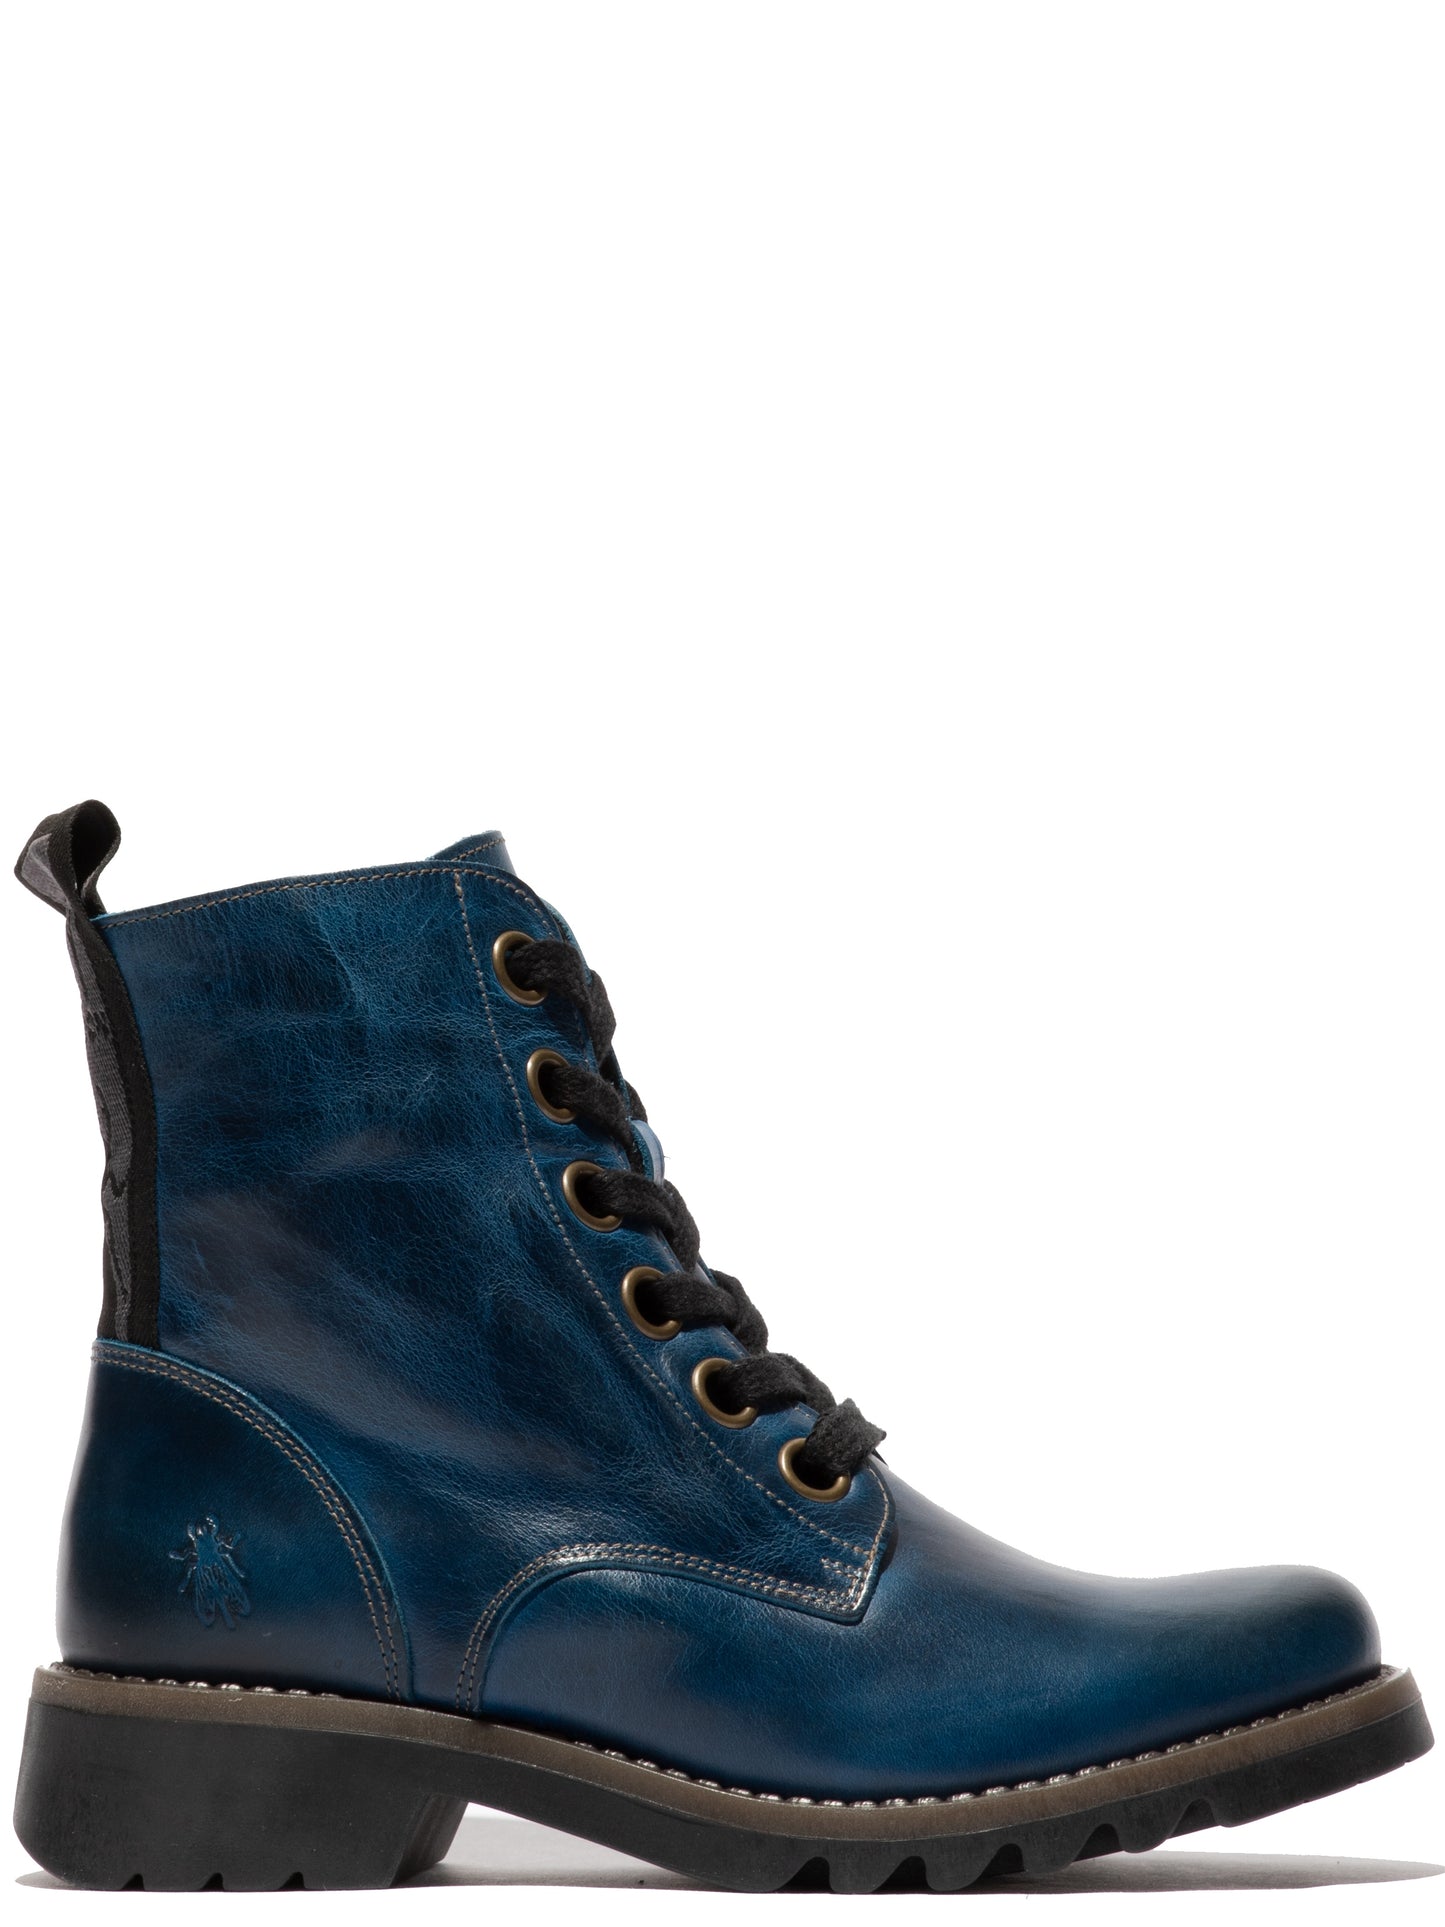 fly london ragi blue boots size 3 now £85 sale